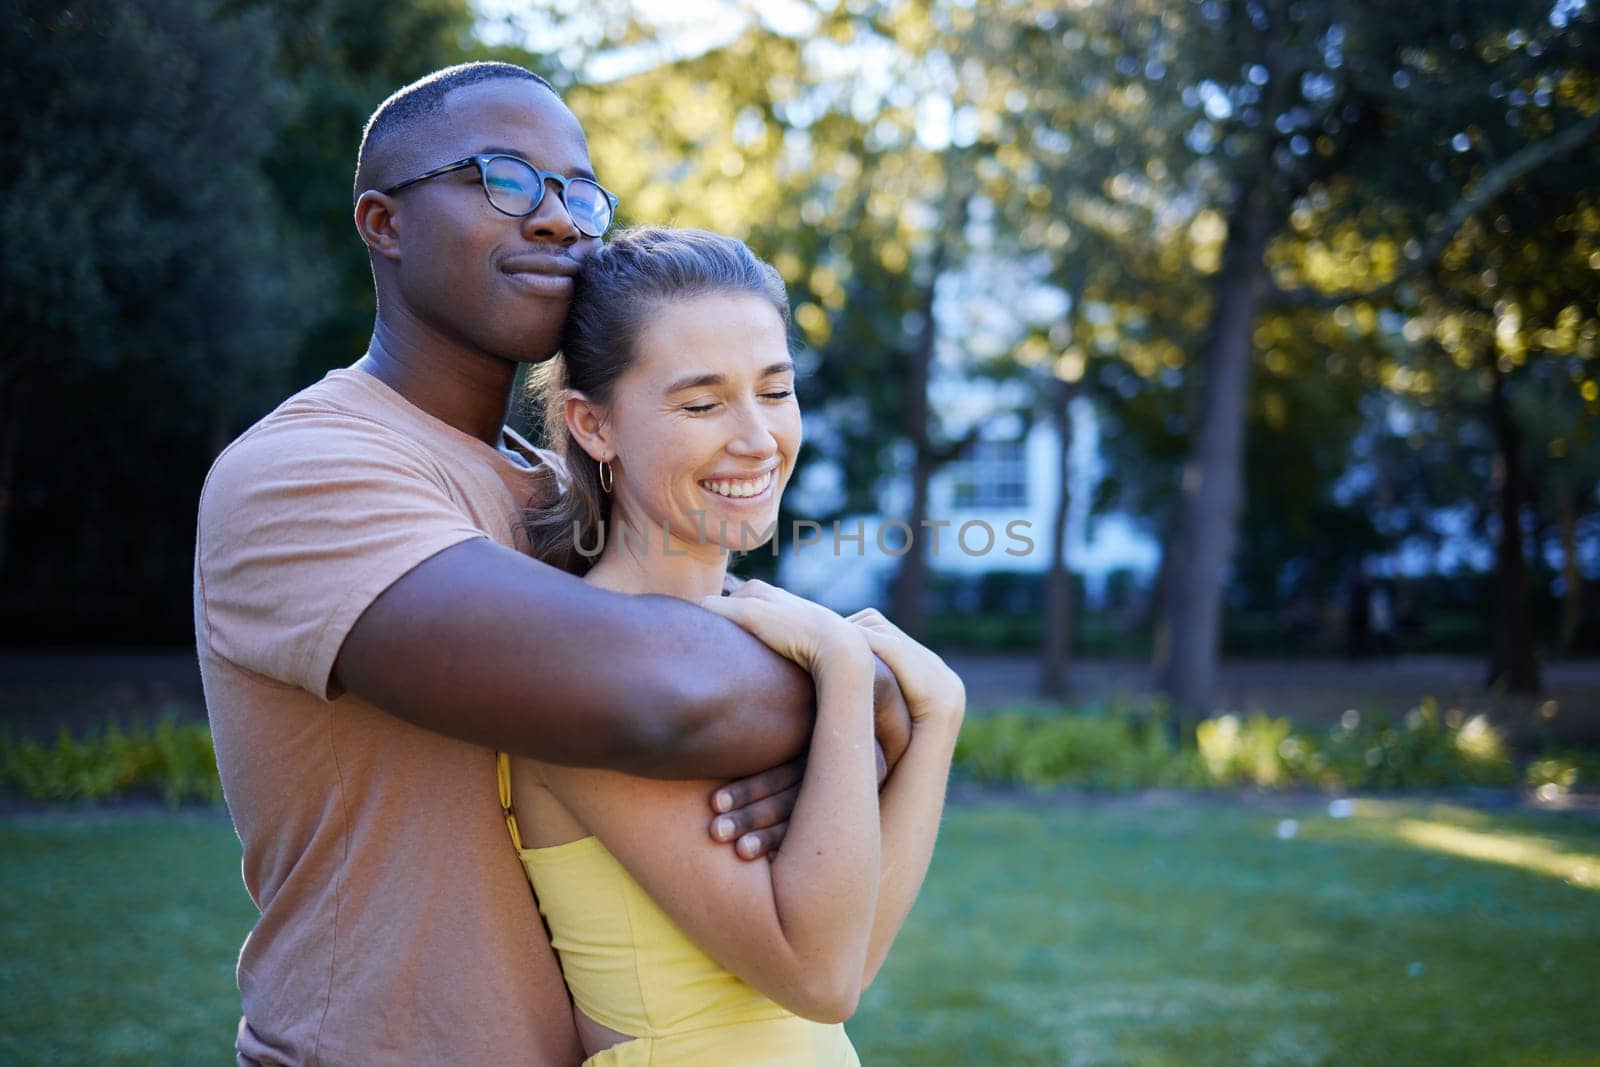 Summer, love and mockup with an interracial couple bonding outdoor together in a park or garden. Nature, diversity and romance with a man and woman hugging while on a date outside in the countryside by YuriArcurs